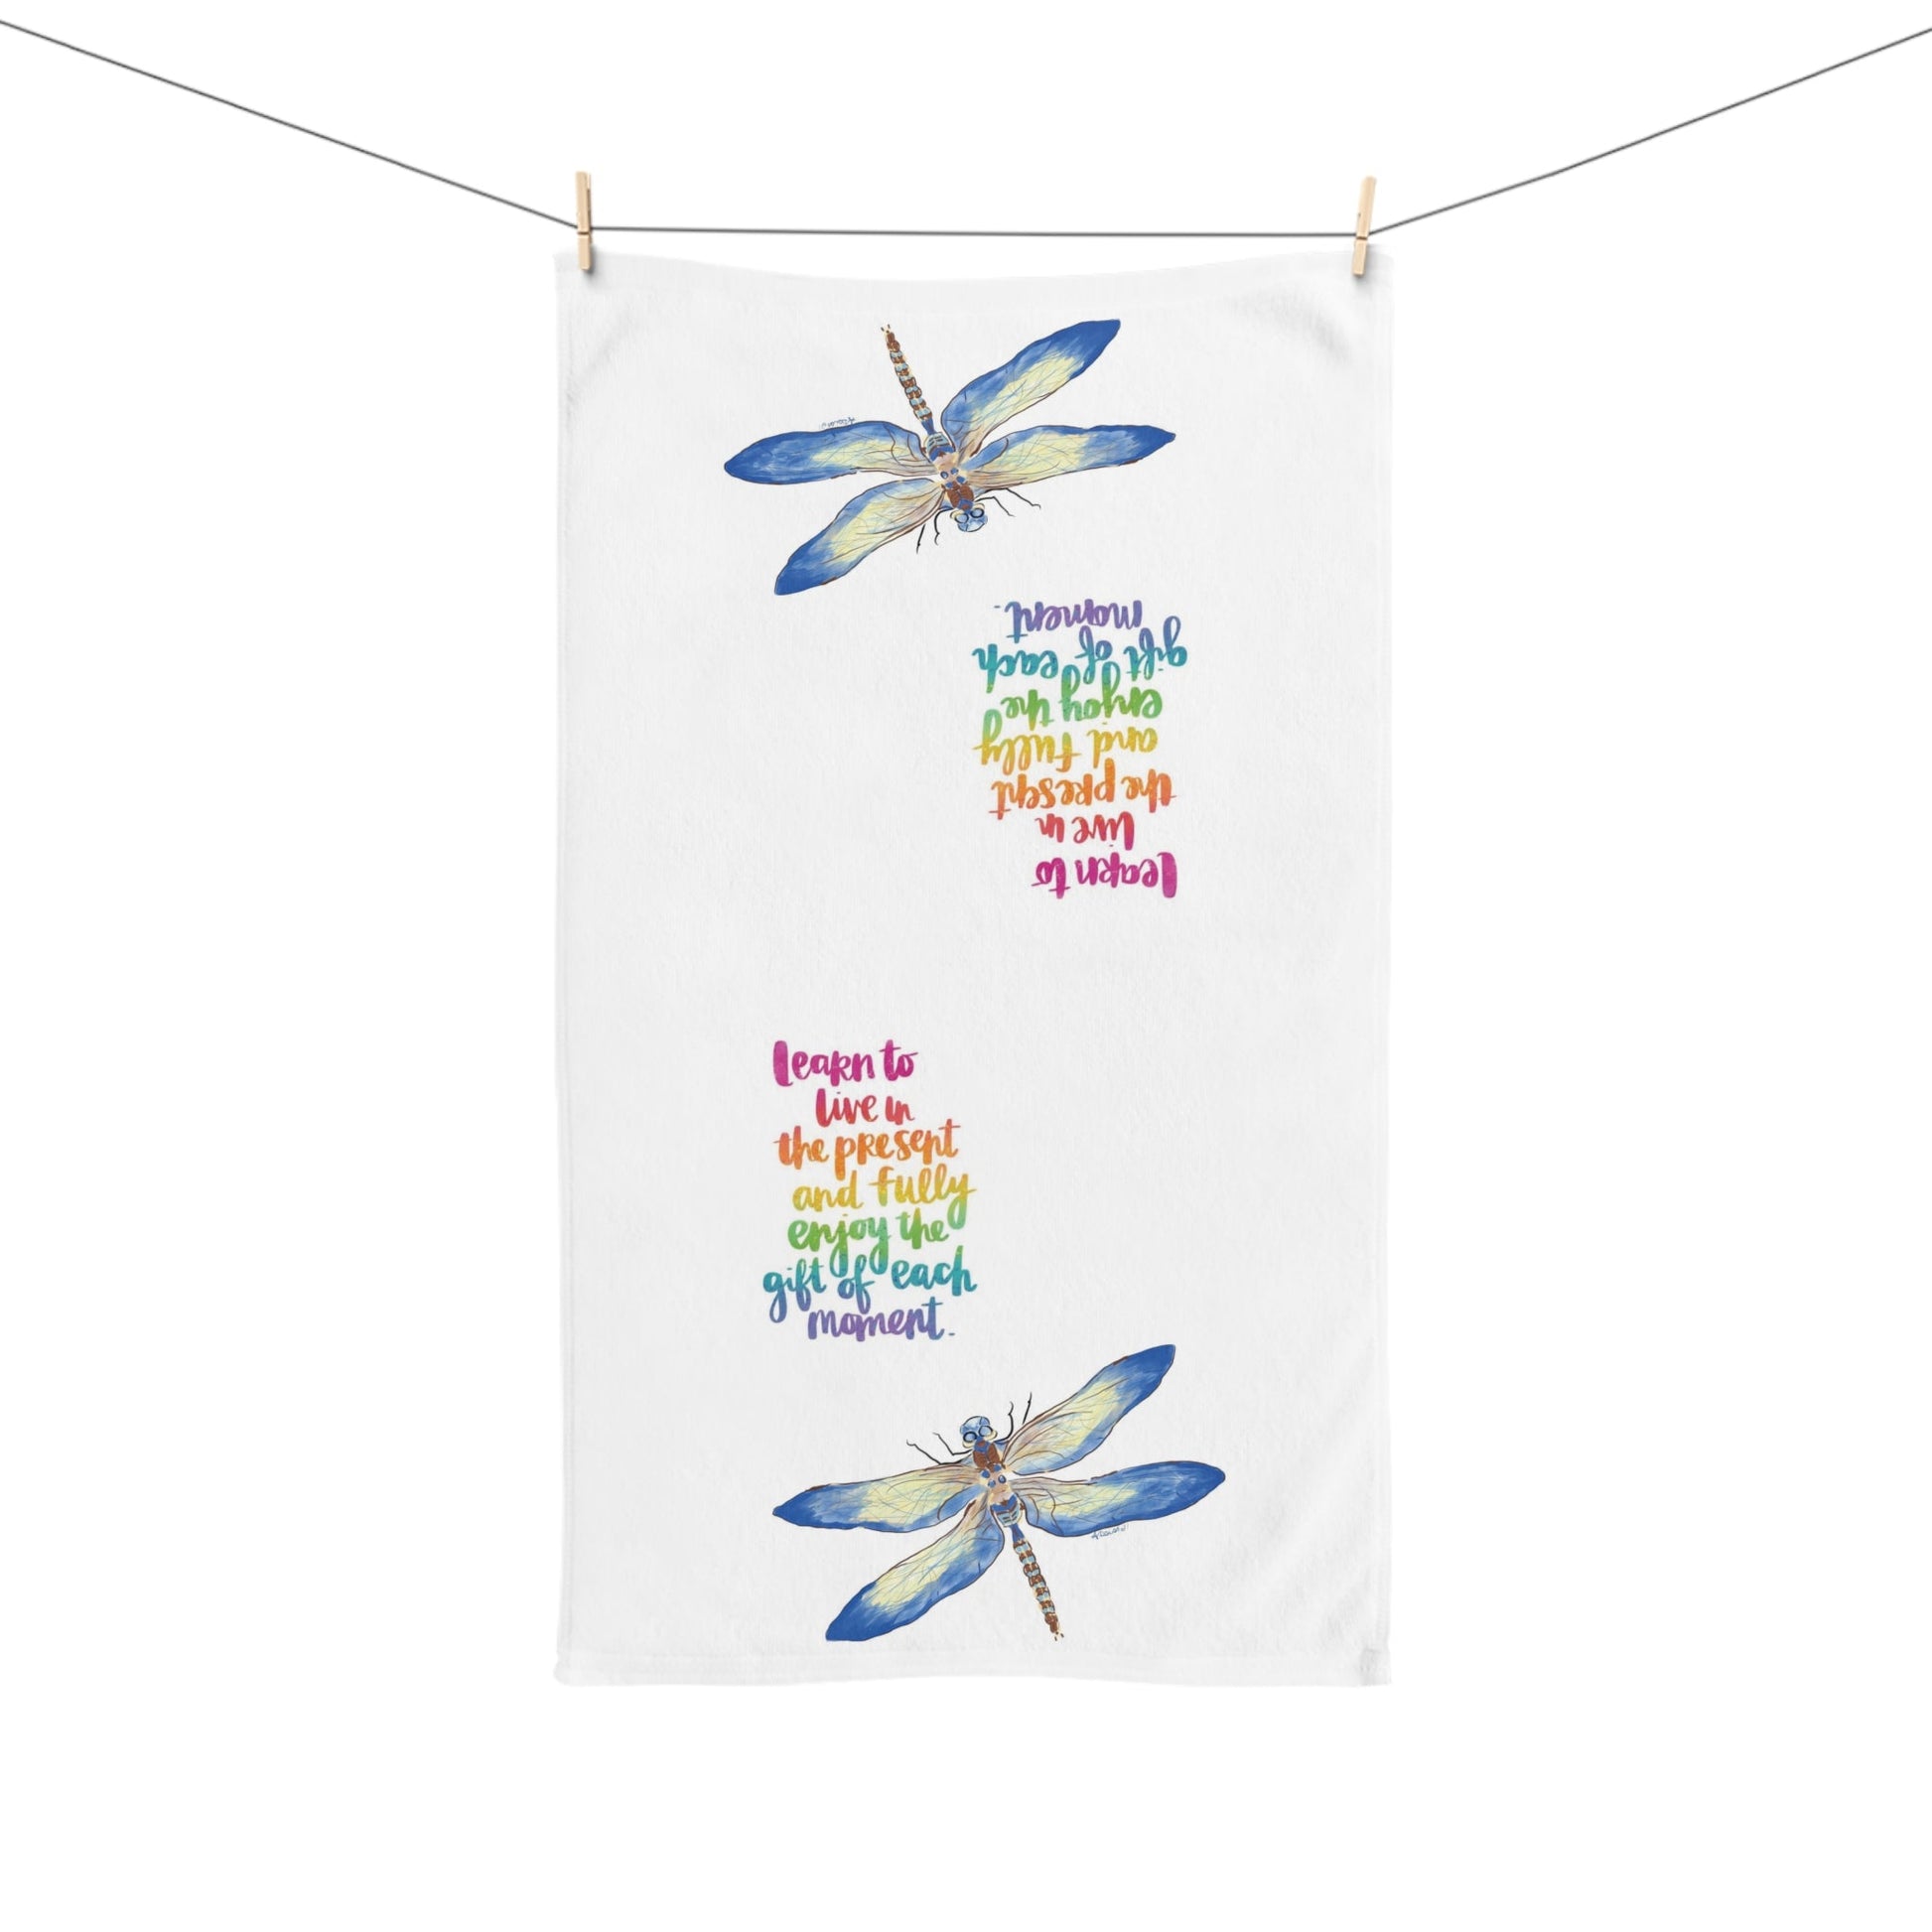 Dragonfly Hand Towel (Poly/Cotton) - Blue Cava